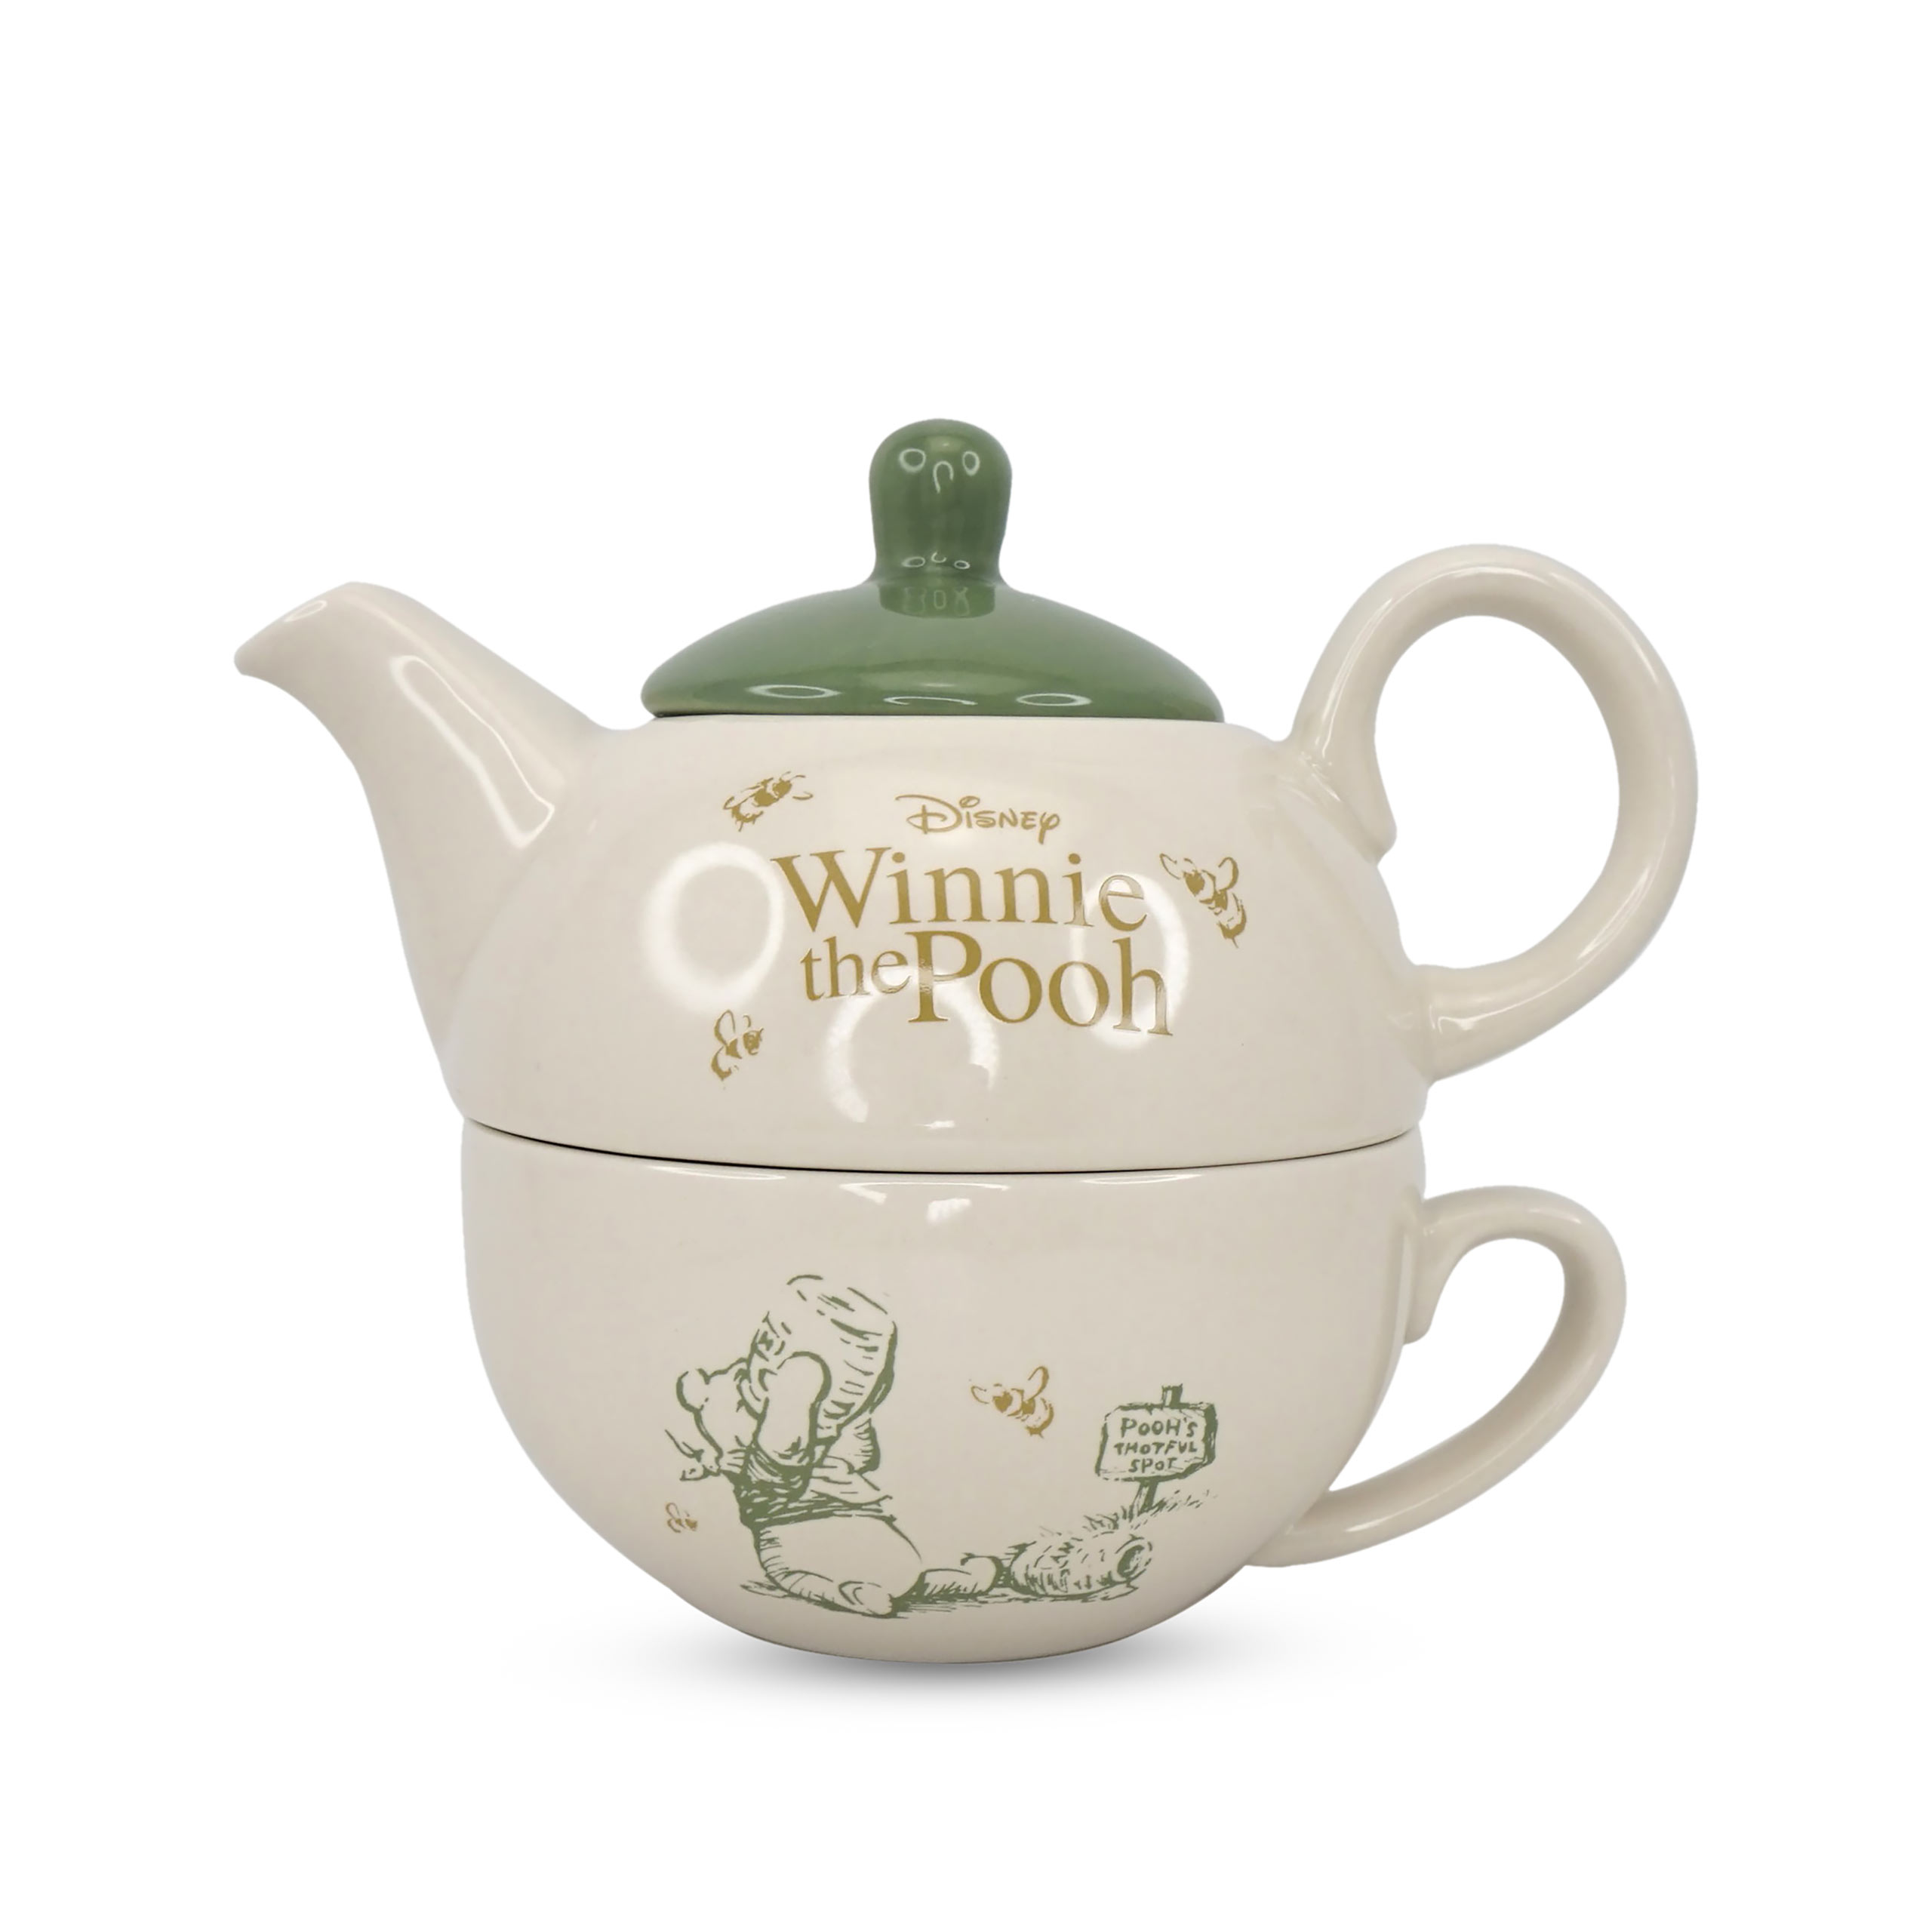 Winnie the Pooh - Teapot with Cup